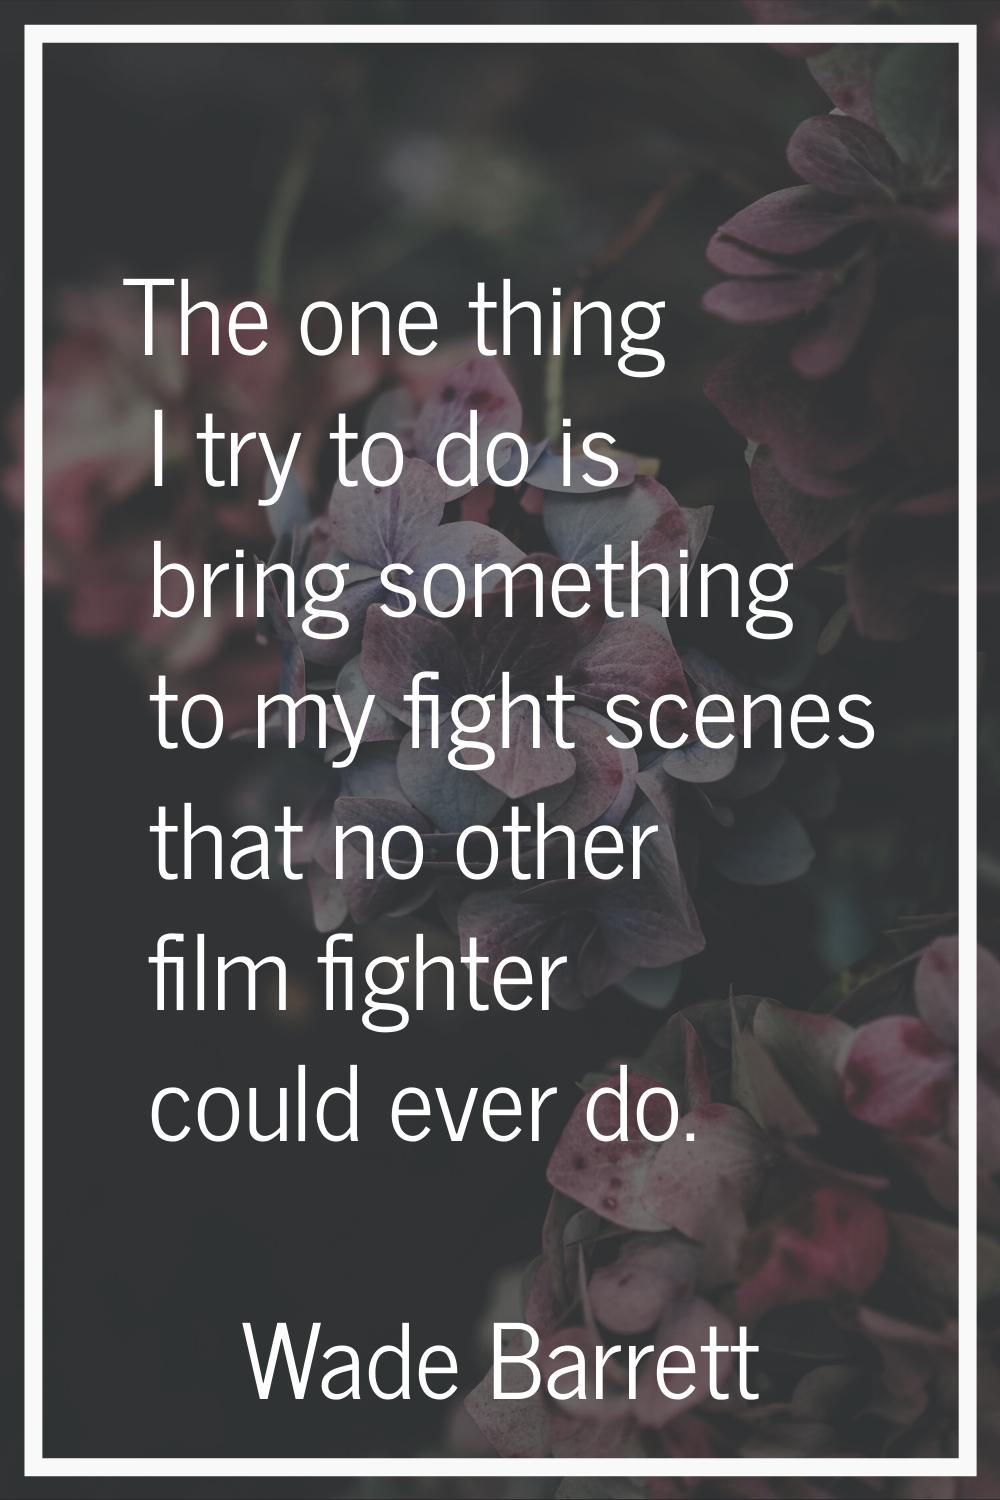 The one thing I try to do is bring something to my fight scenes that no other film fighter could ev